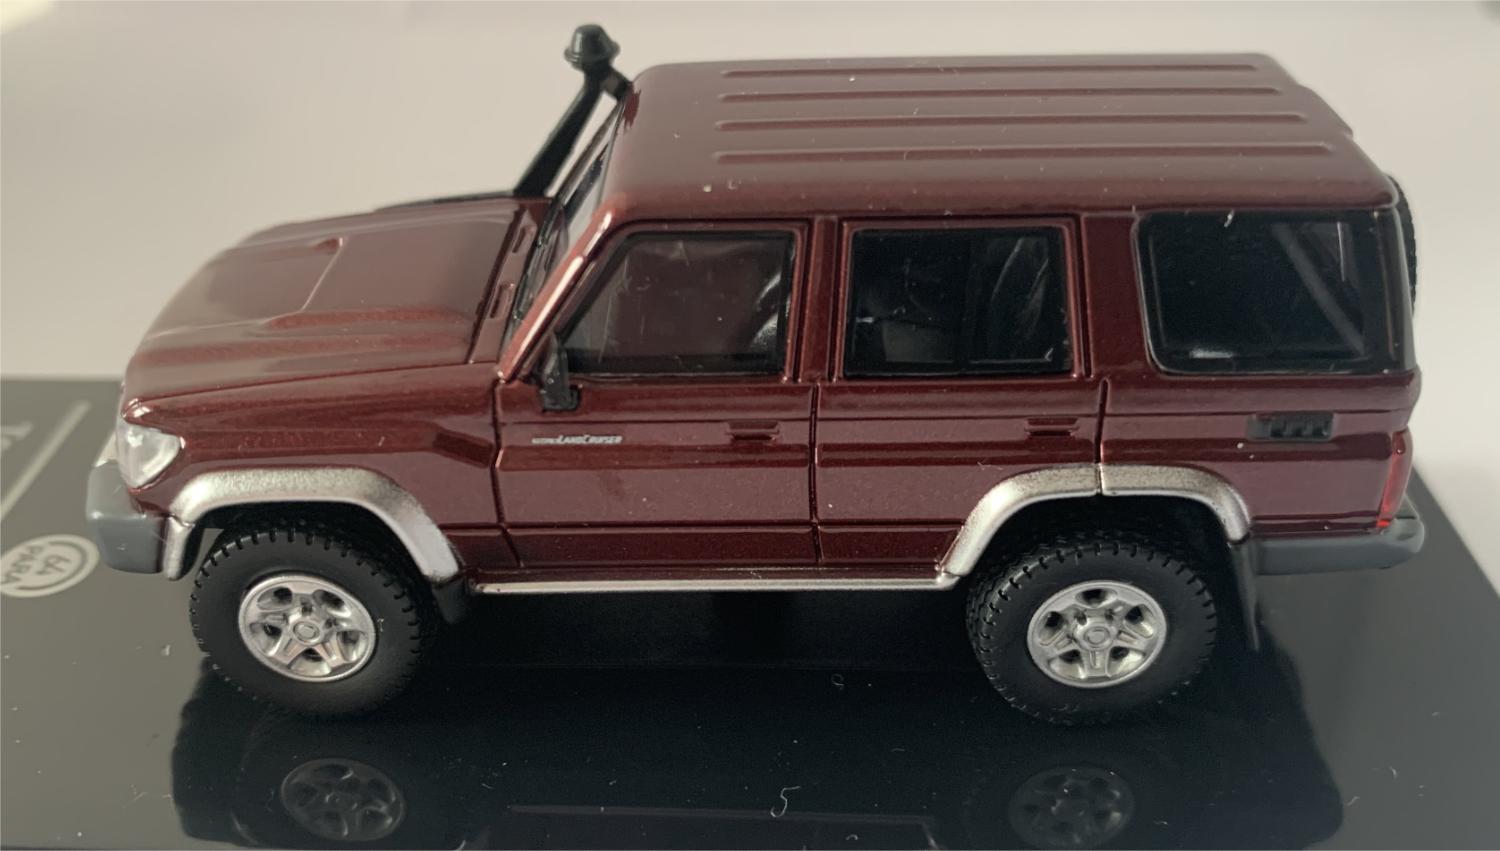 An excellent scale model of a Toyota Land Cruiser decorated in merlot red with silver wheels, spare wheel (not removable) on rear door and snorkel